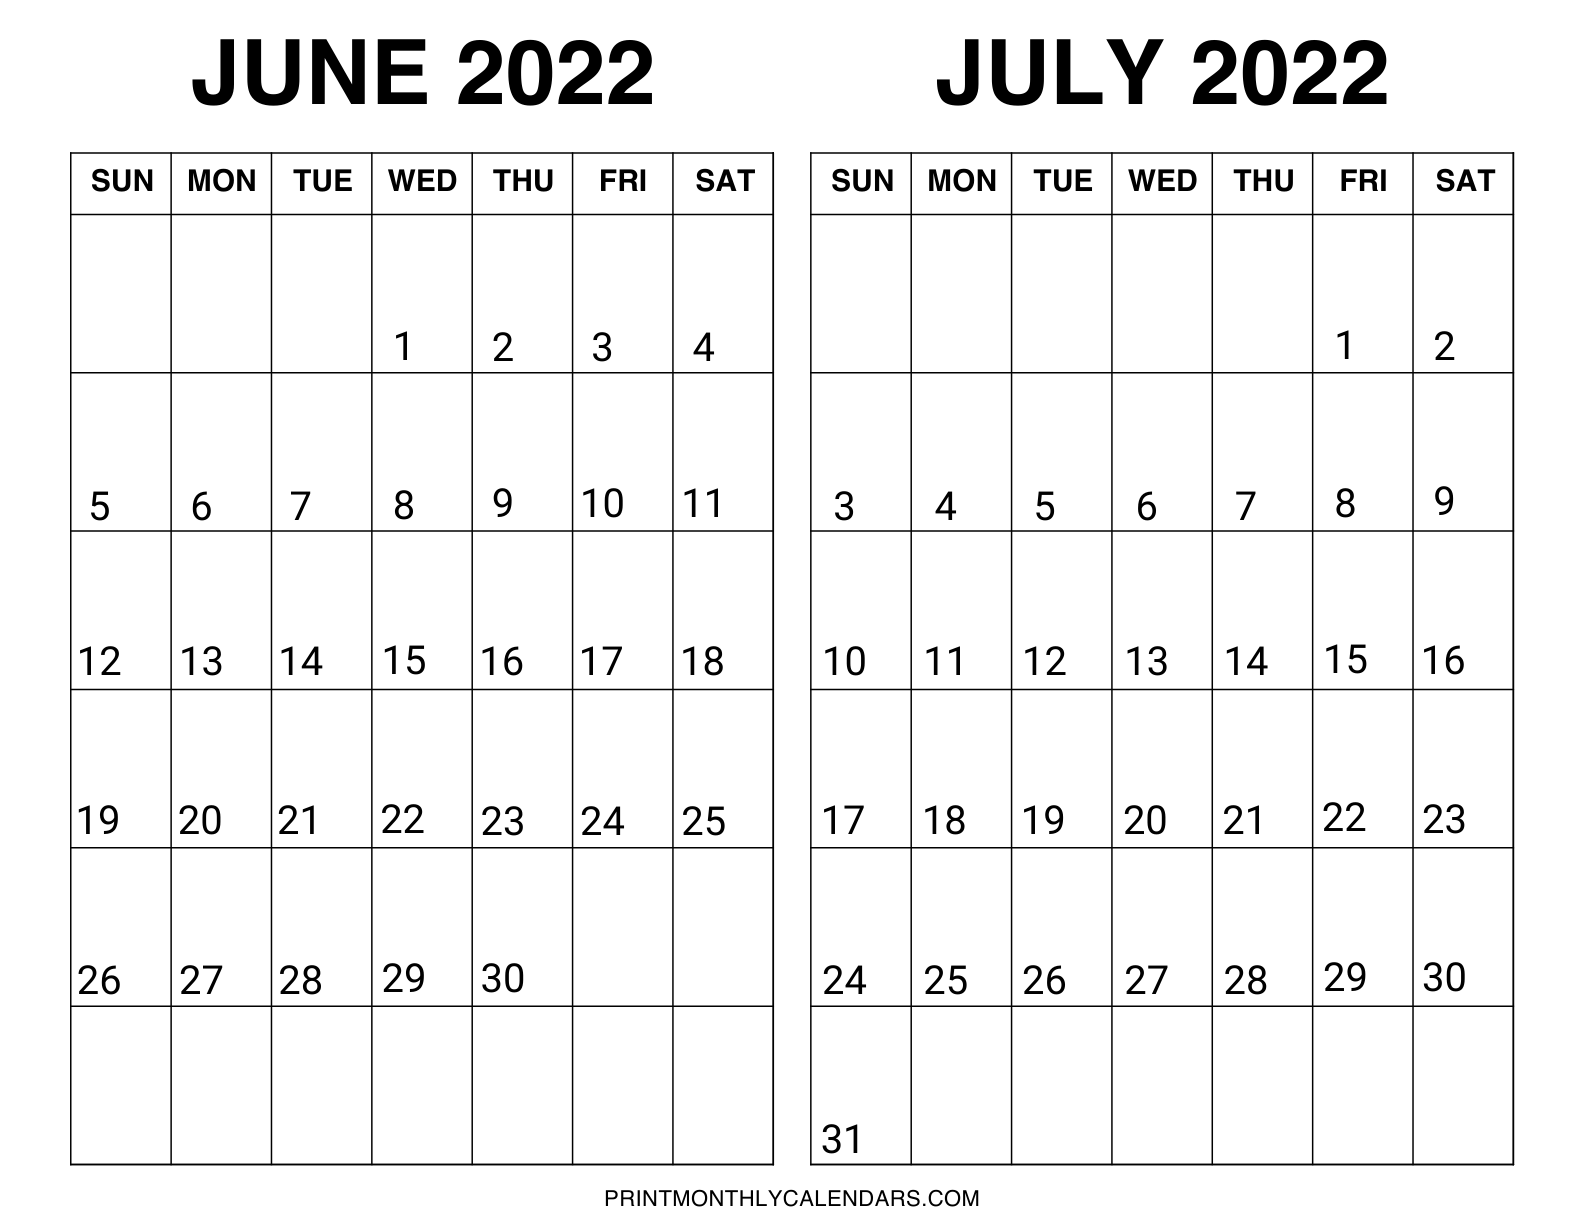 Sunday start June and July 2022 month calendar template in horizontal layout on one page. This US letter size template is designed in US letter size with bold monthly dates.